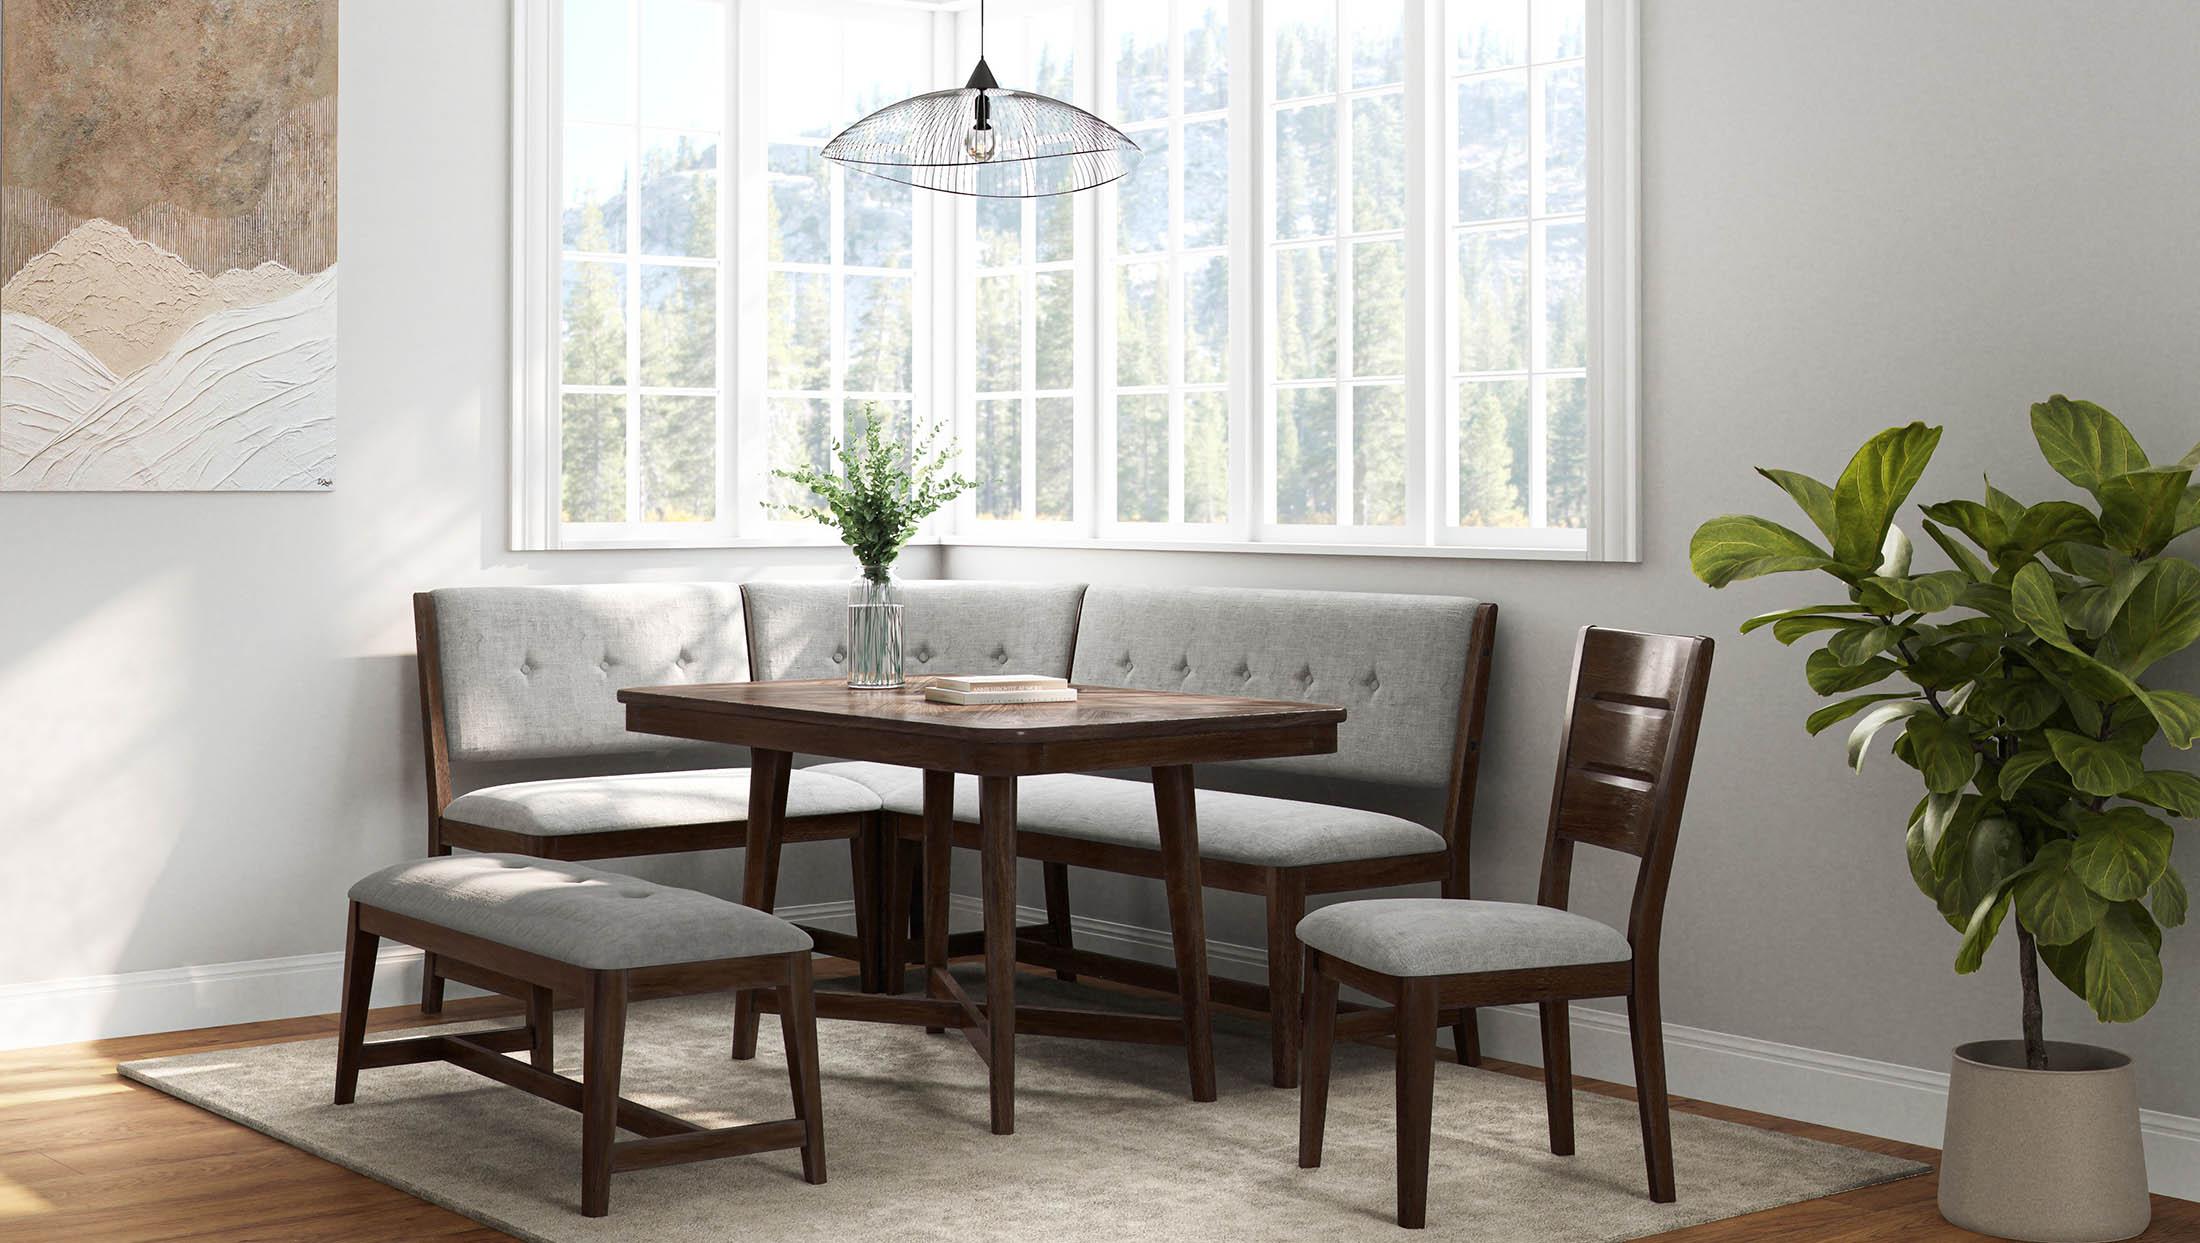 Modern Dining Table Set DORVAL 8540-500-Set-5 8540-500-Set-5 in Brown Fabric